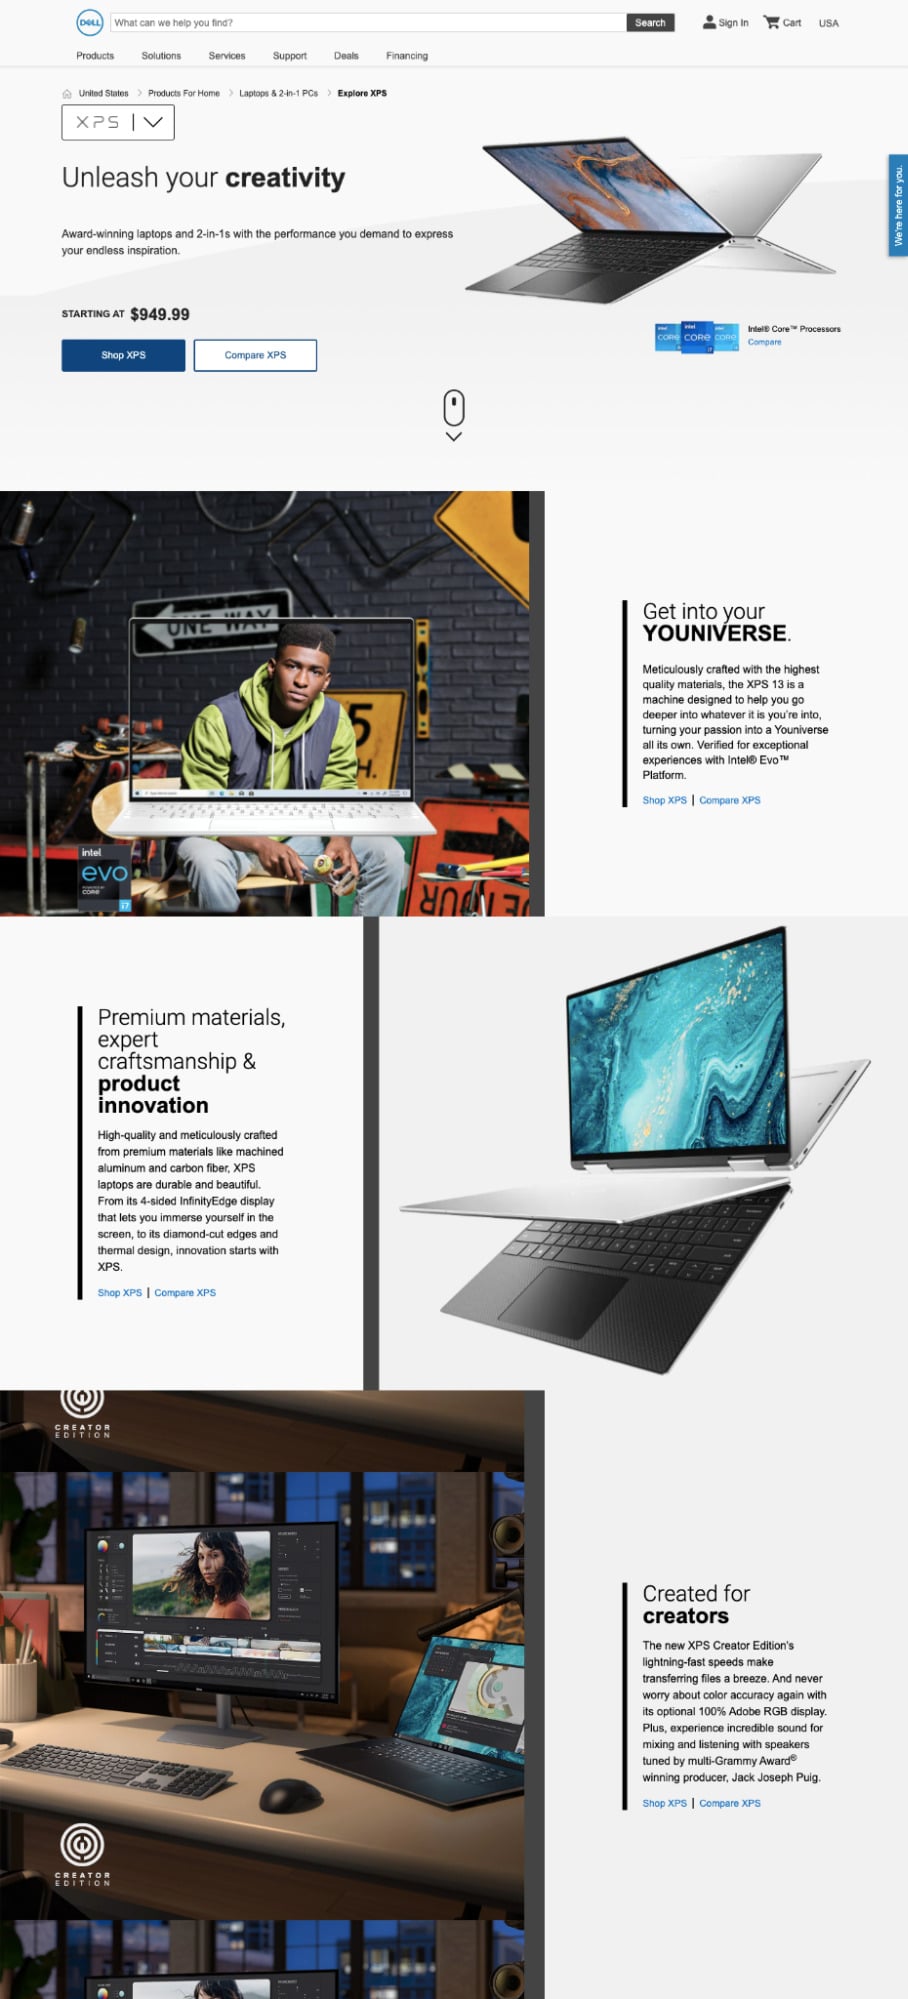 Dell landing page